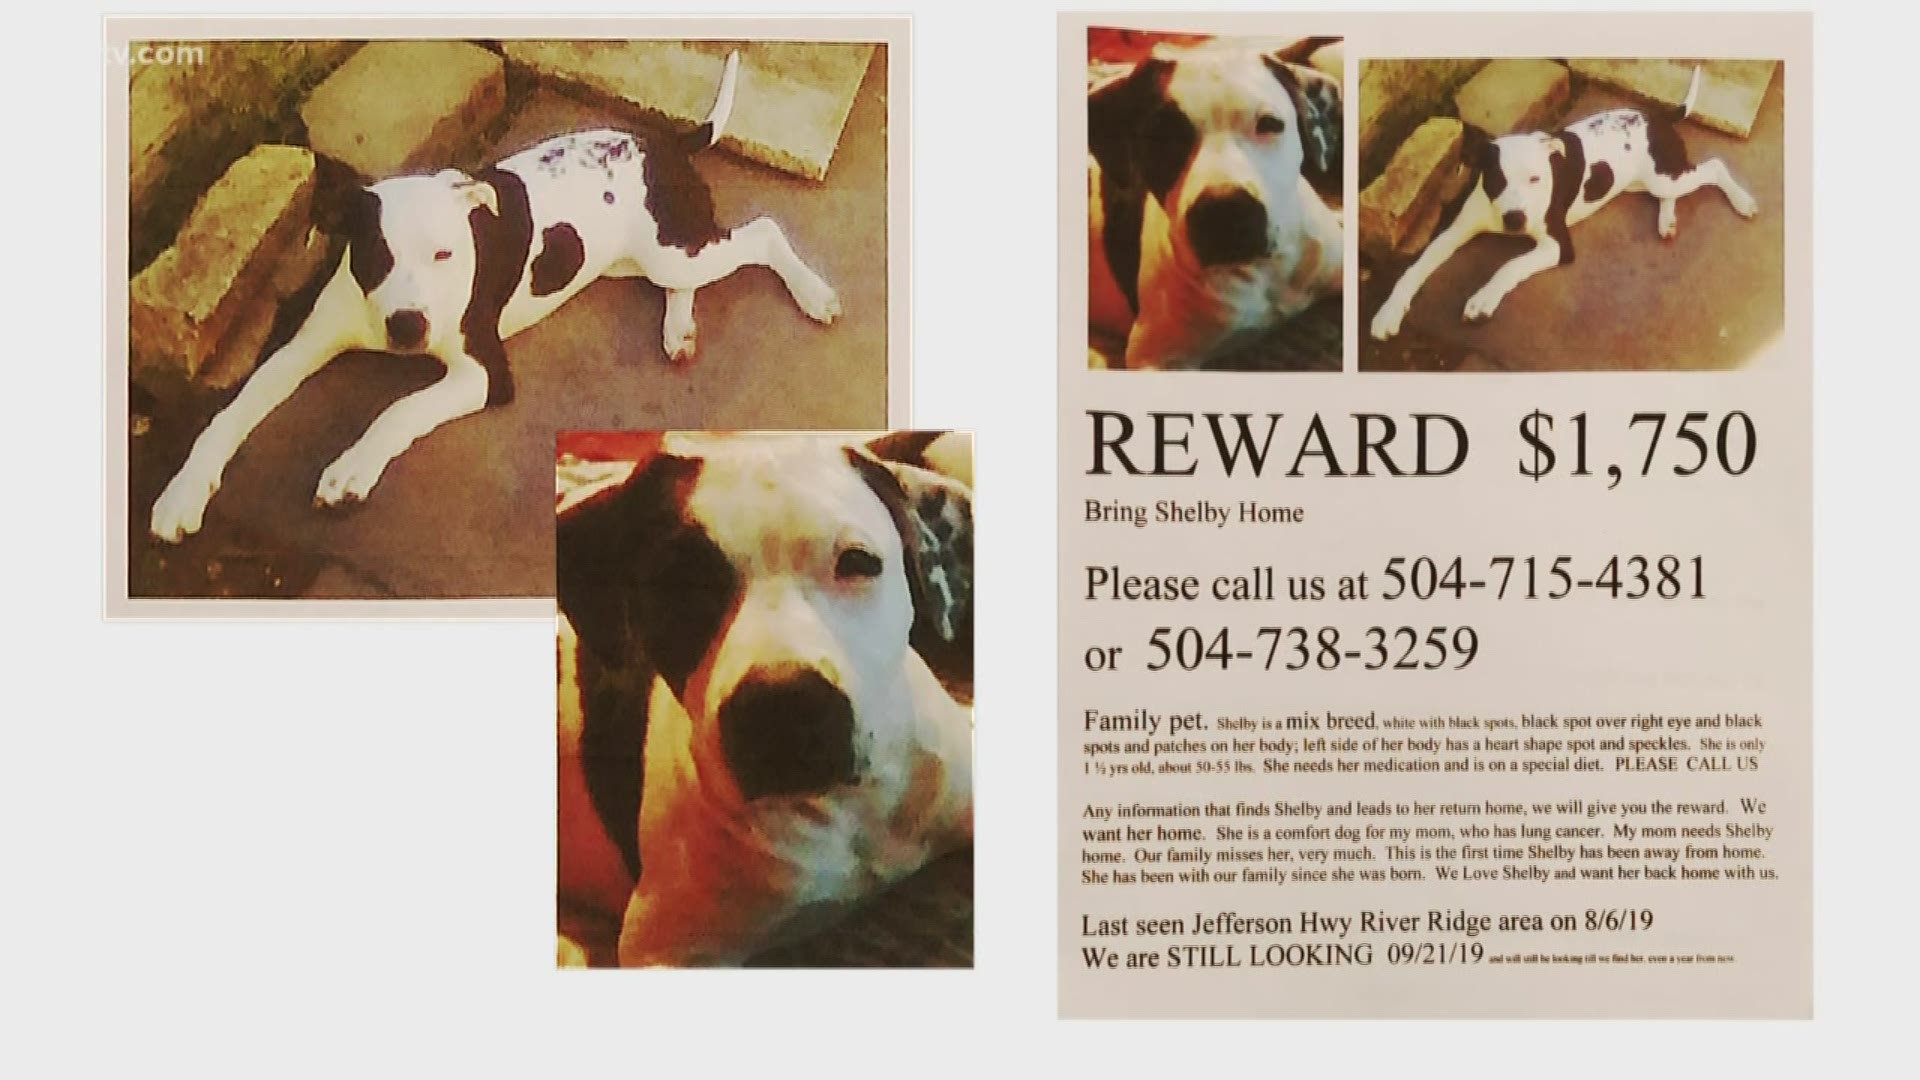 Instead of resting in her home, Barbara Barrosse is using what little strength she has left, putting up fliers and looking for her lost dog Shelby.